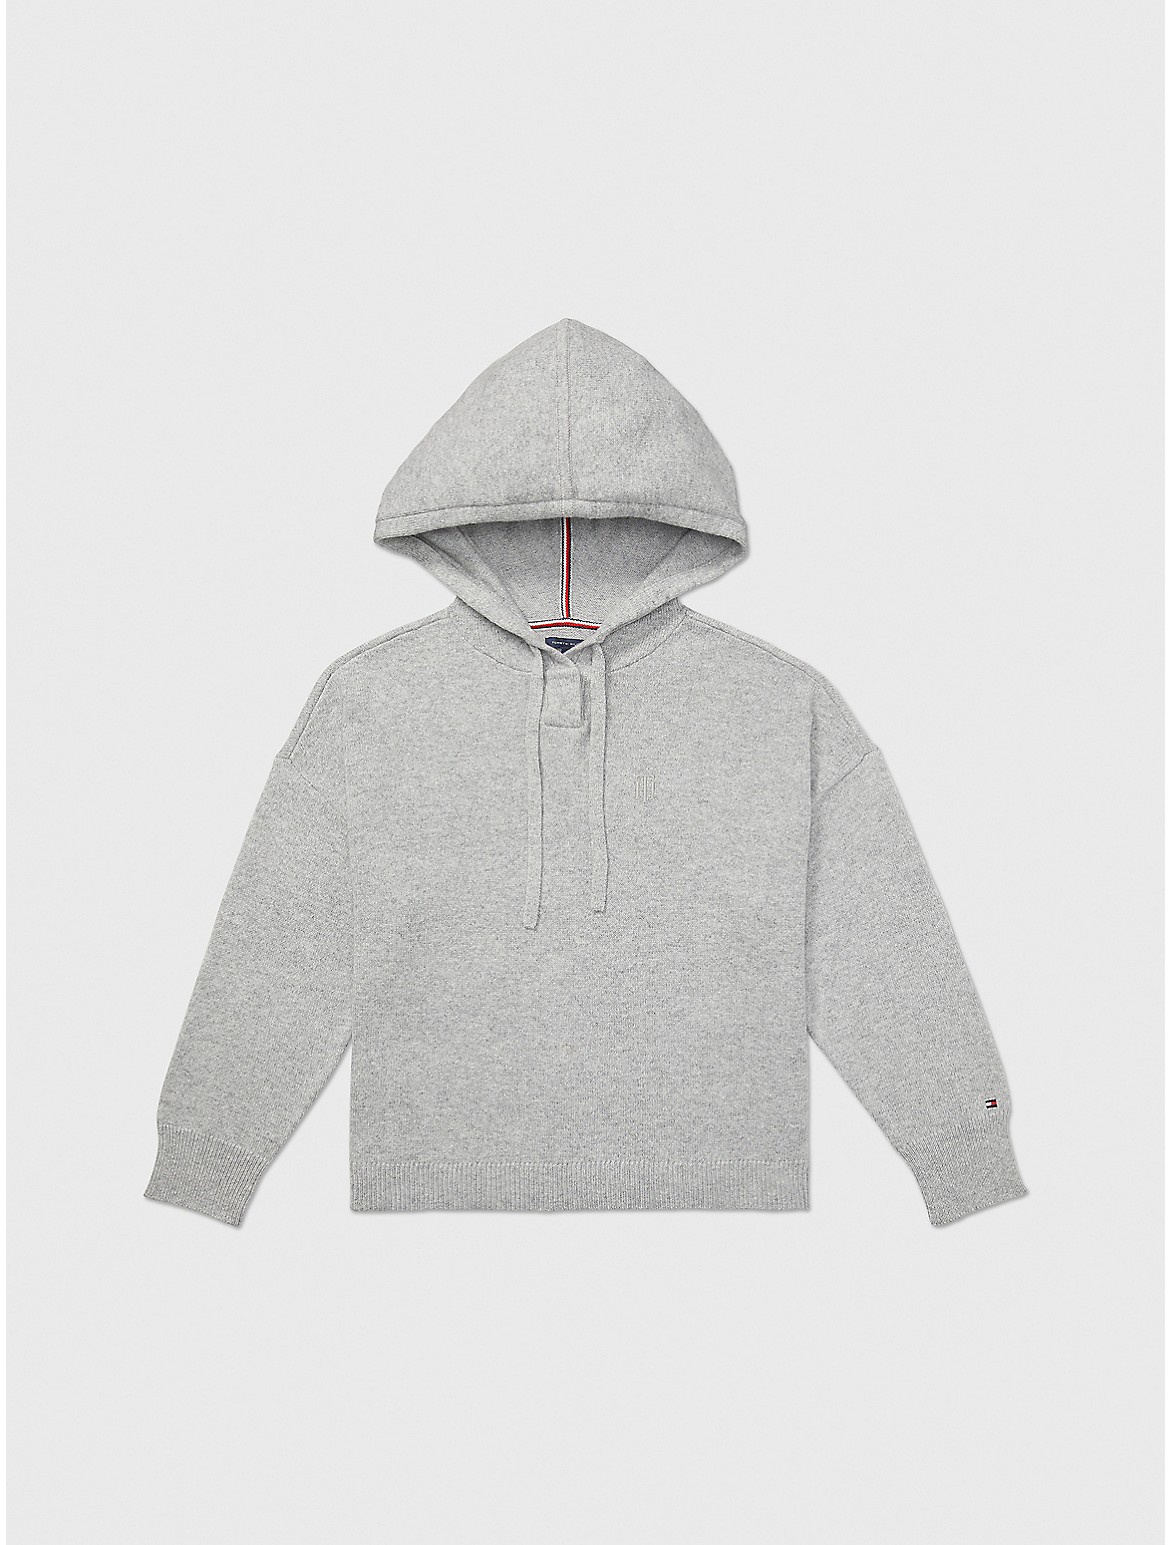 Tommy Hilfiger Hoodie Sweater In Light Grey Heather